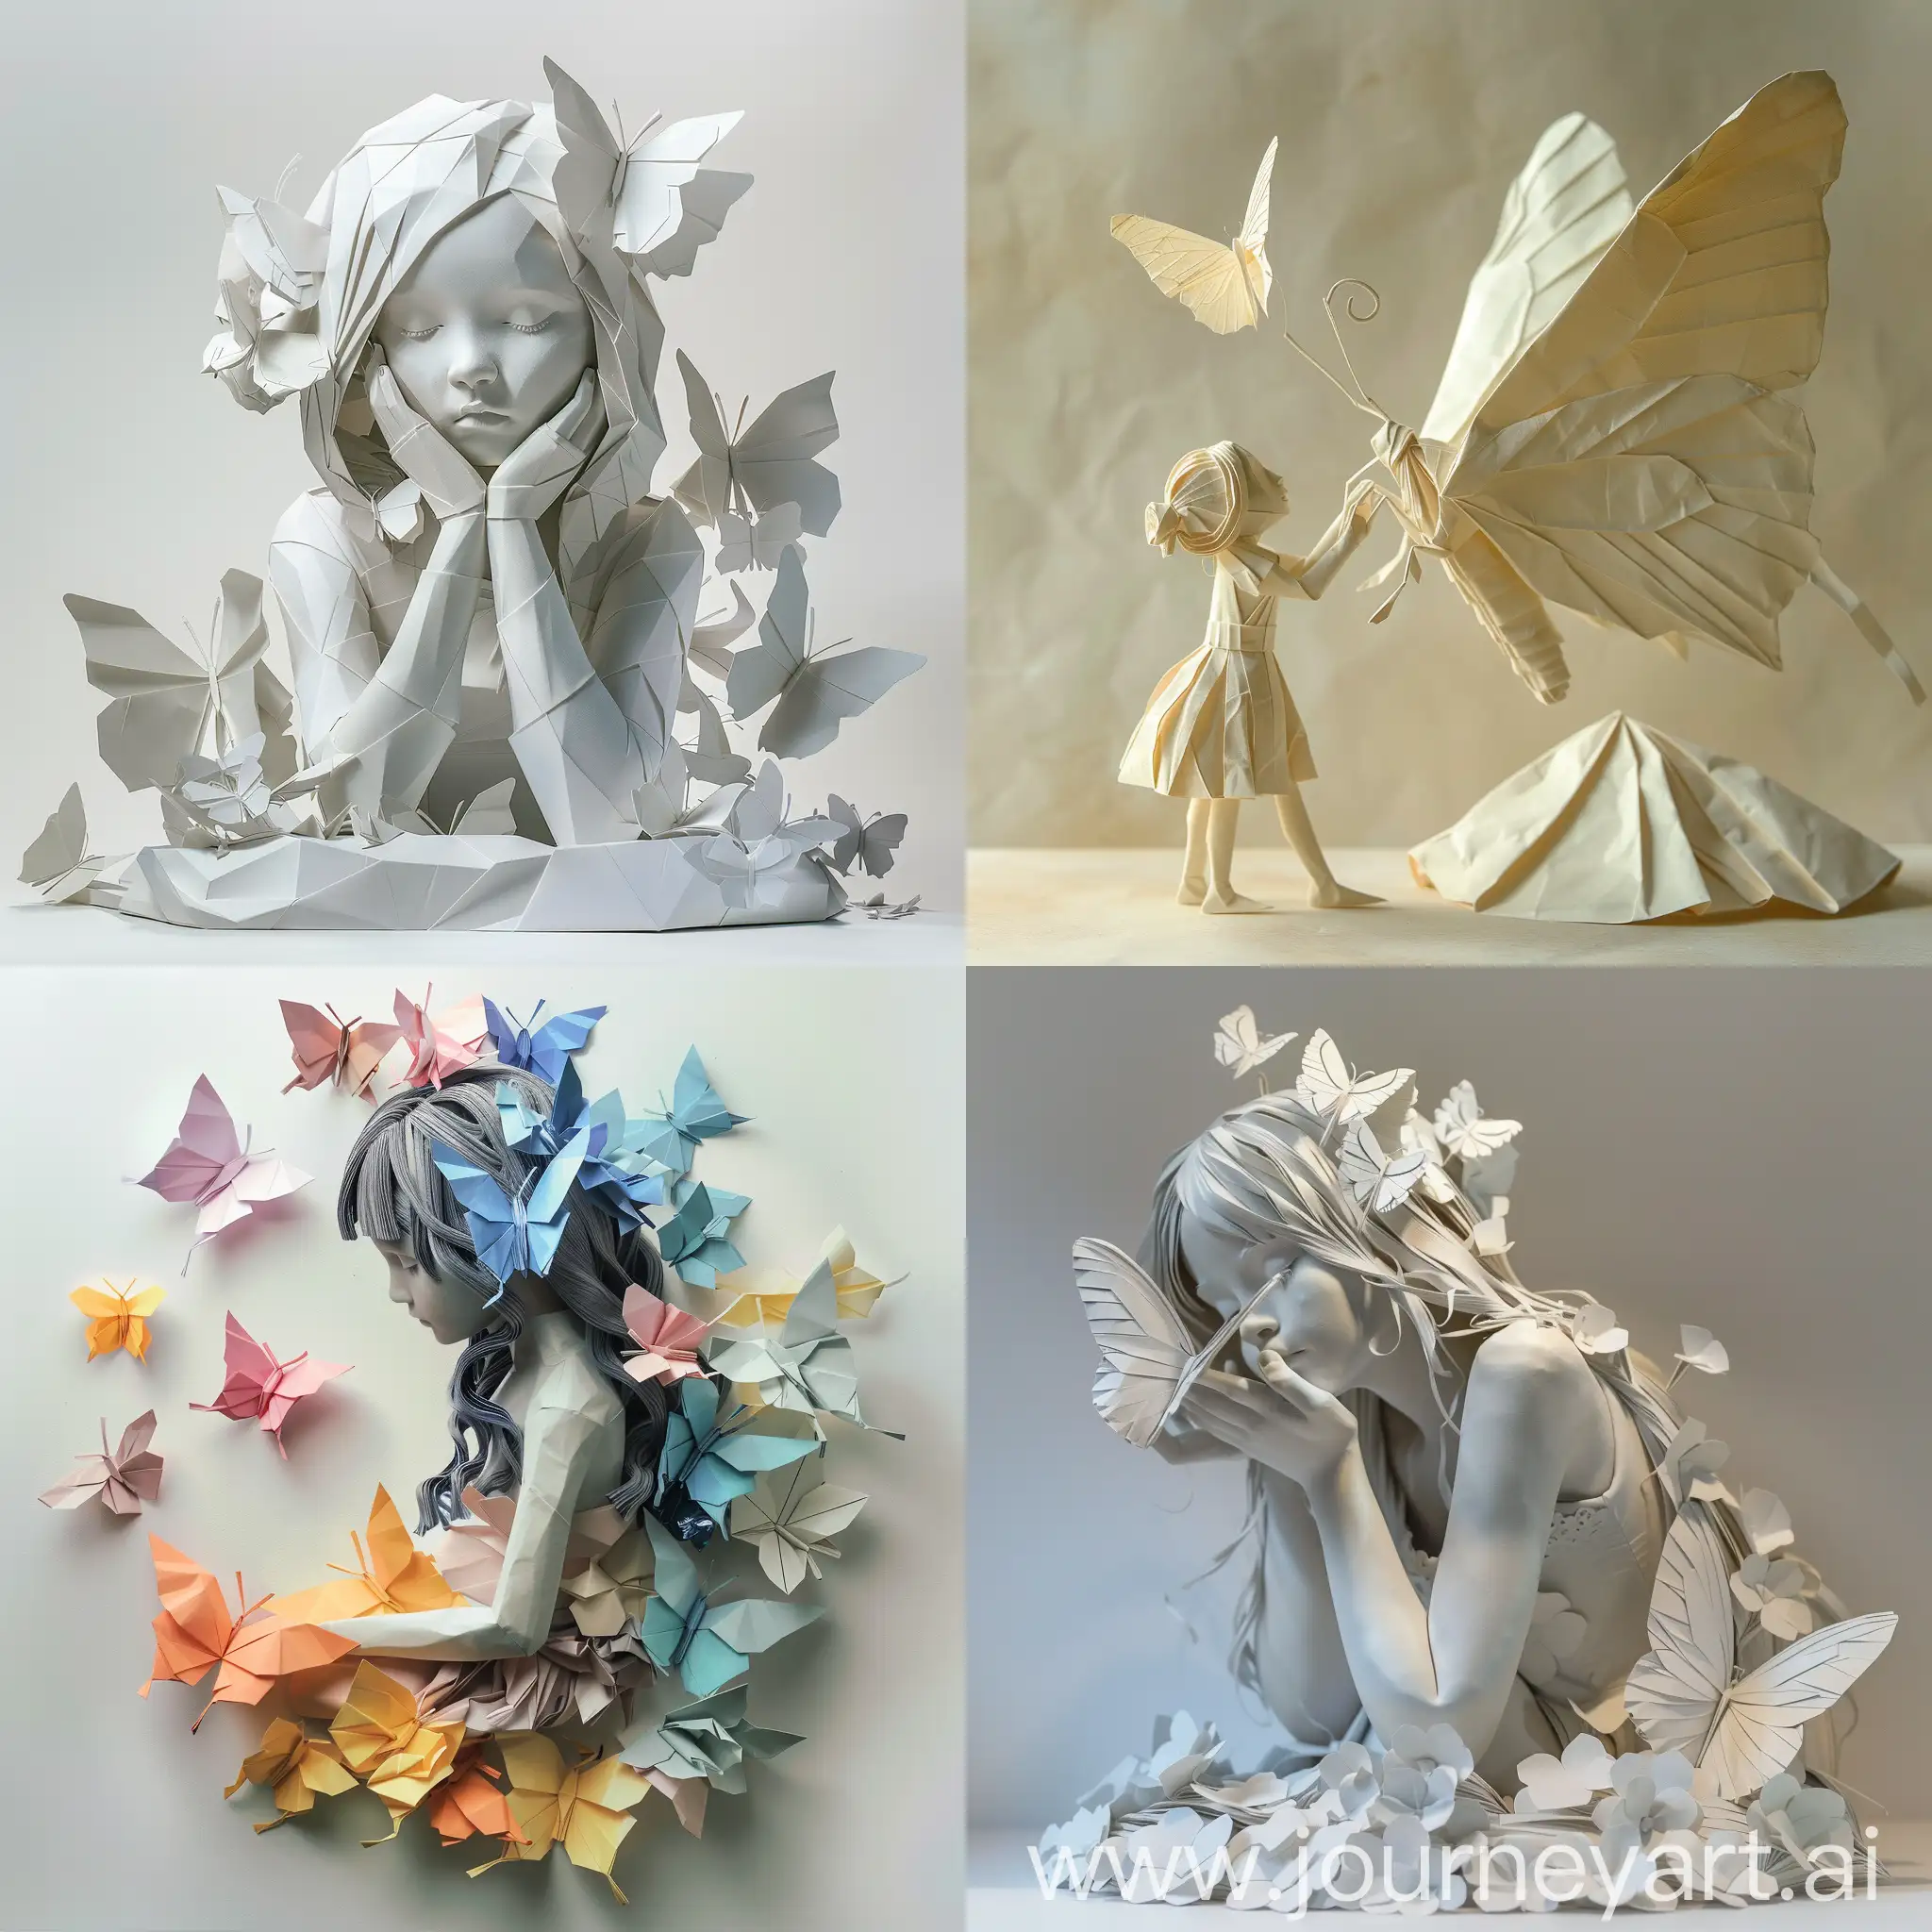 This series, "Girl and Butterfly," showcases the dreamlike interplay between girls and butterflies through origami sculptures, conveying symbols of innocence, transformation, and beauty.

Butterflies represent rebirth and the transcendence of the soul, girls symbolize purity and hope, while paper signifies the continuation of knowledge, art, and culture. Through exquisite origami techniques, the artist merges these elements to create serene and poetic scenes, evoking a deep contemplation of the fragility and beauty of life in the viewer.